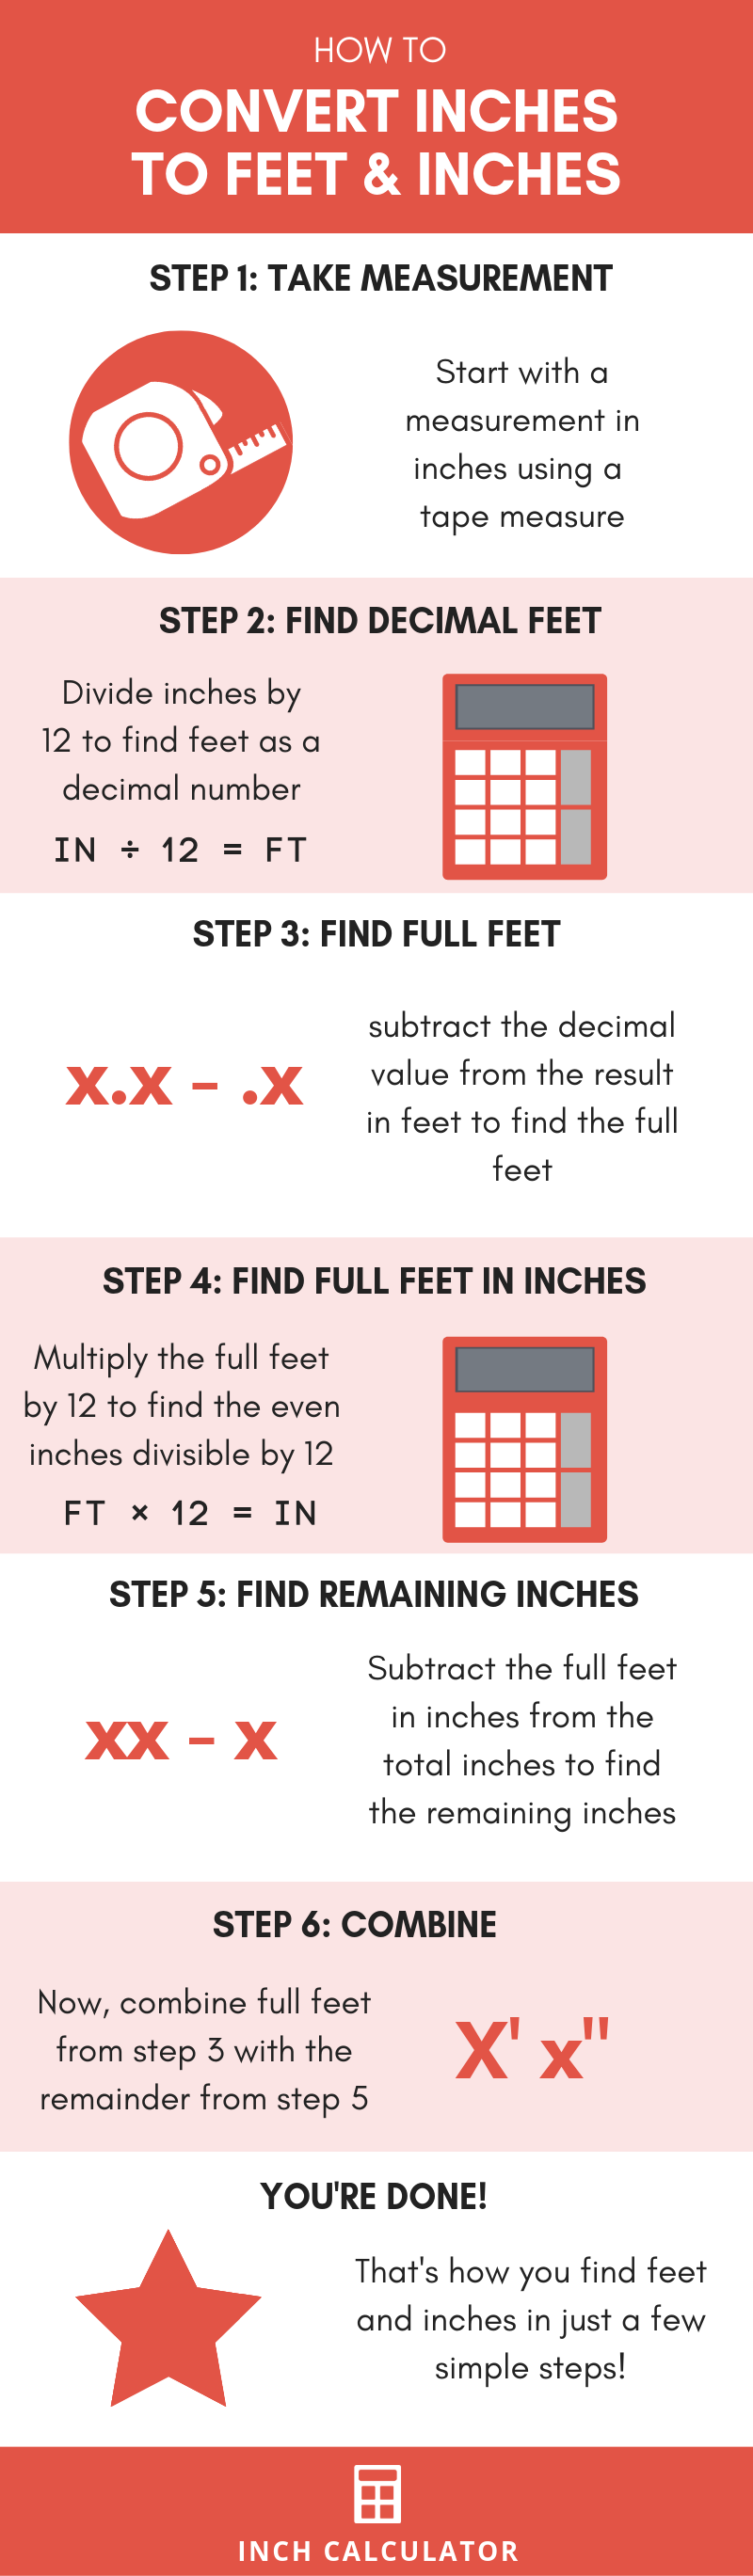 Convert Inches To Feet Infographic 